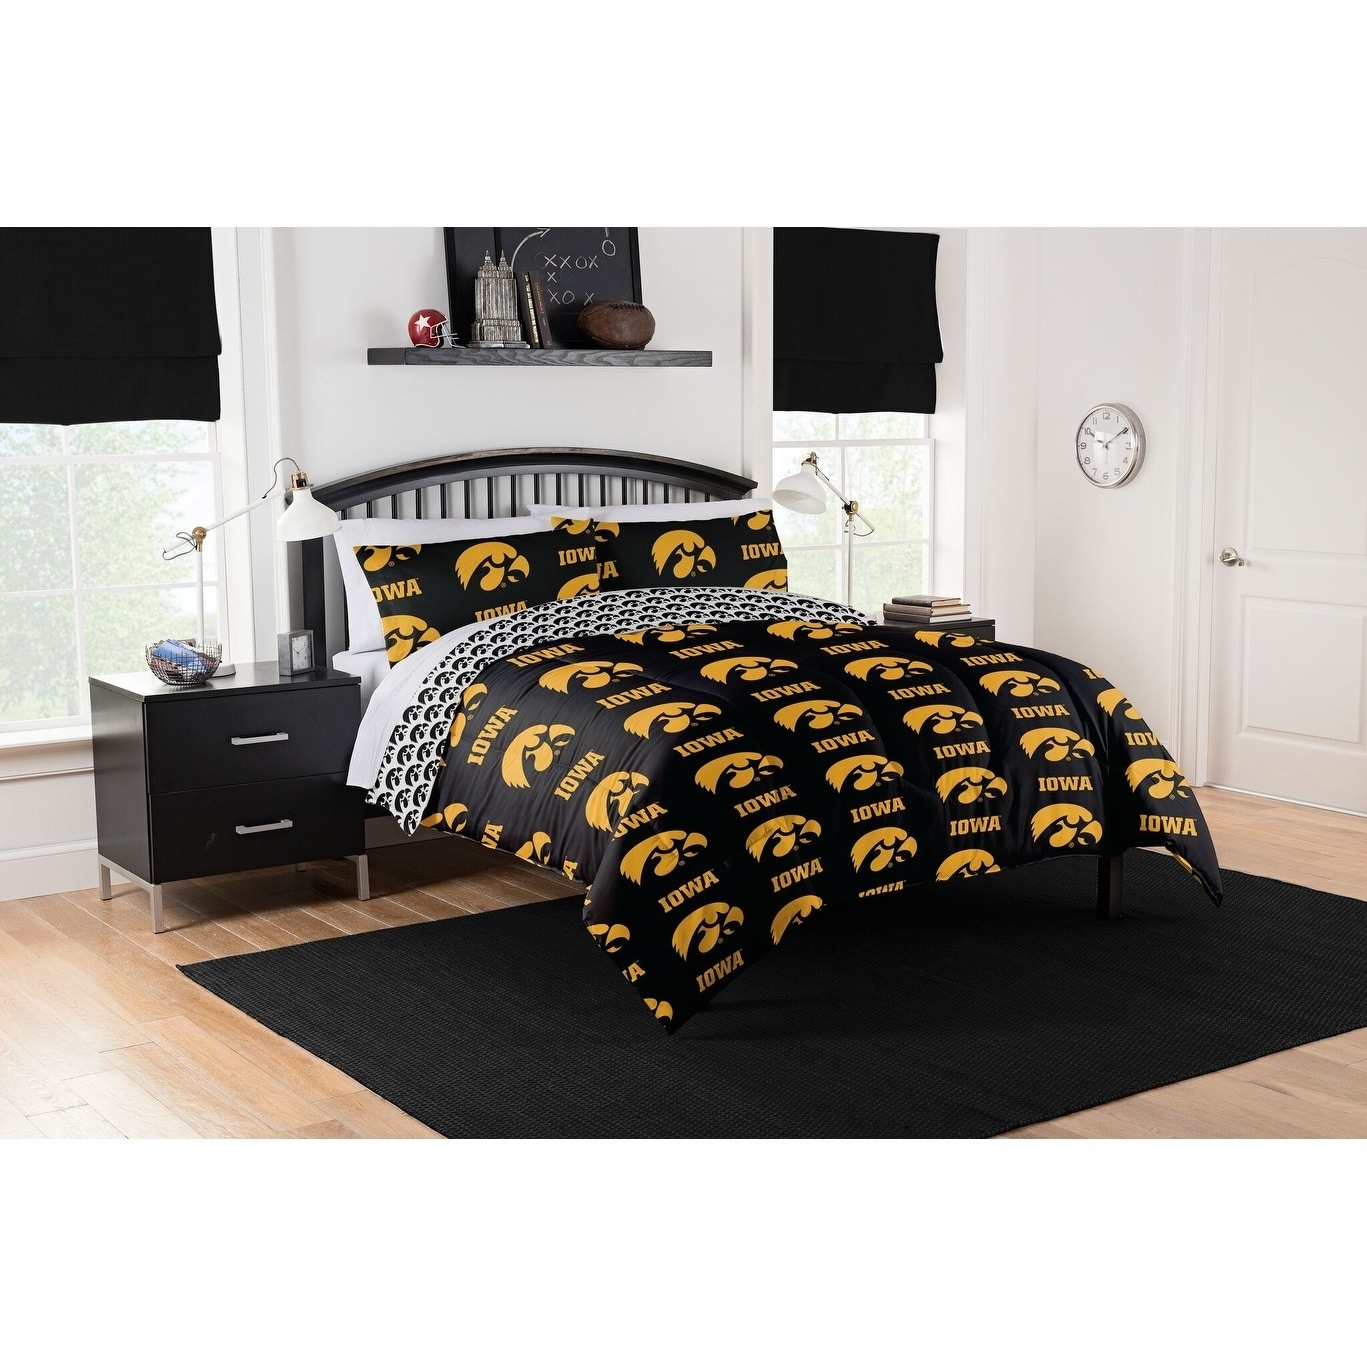 COL 875 Iowa Hawkeyes Queen Bed In a Bag Set